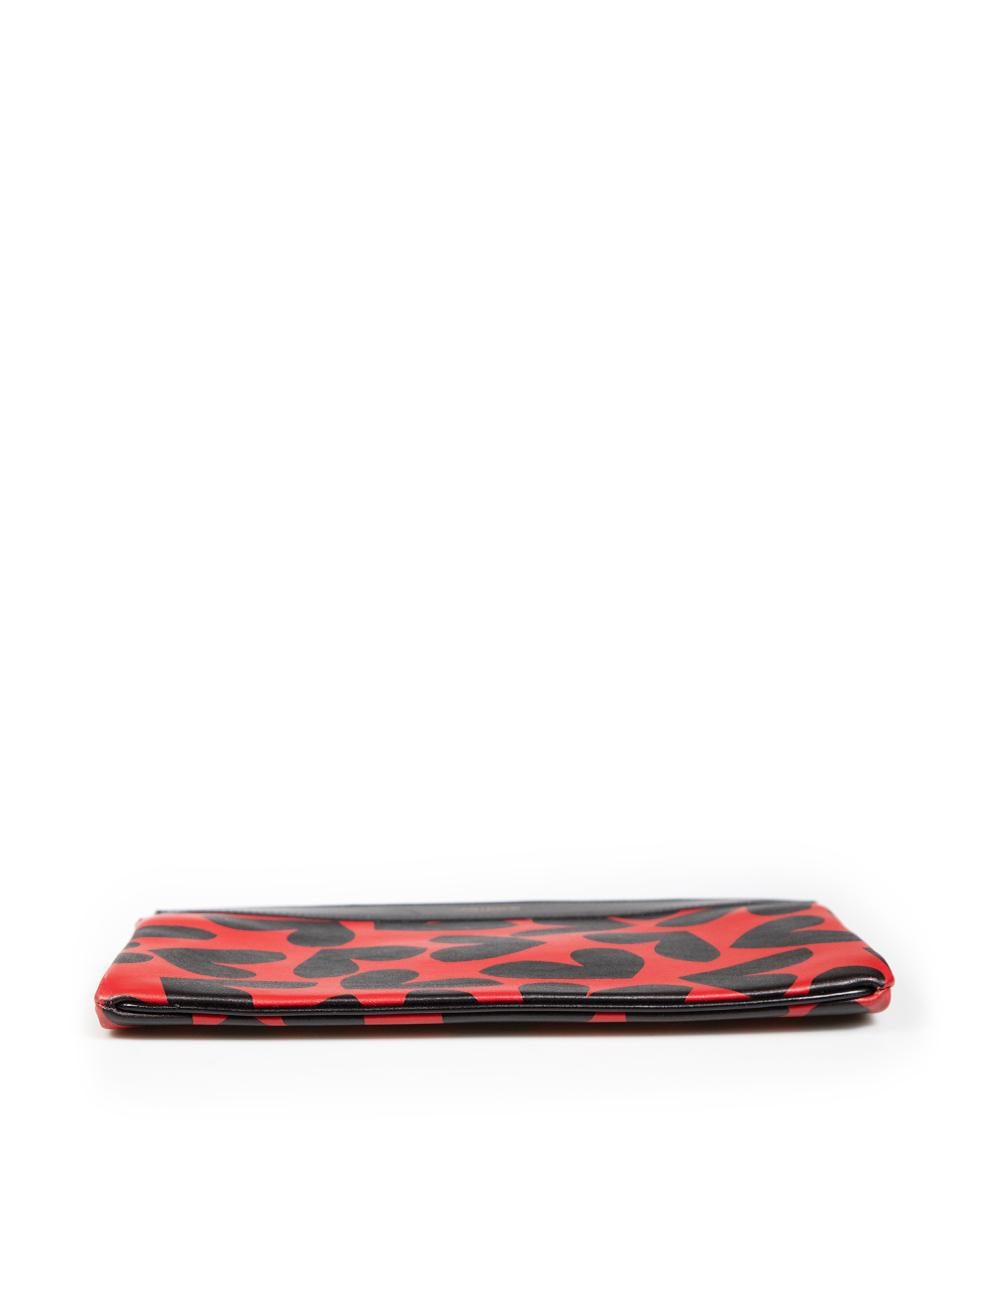 Women's Saint Laurent Heart Printed Leather Clutch For Sale